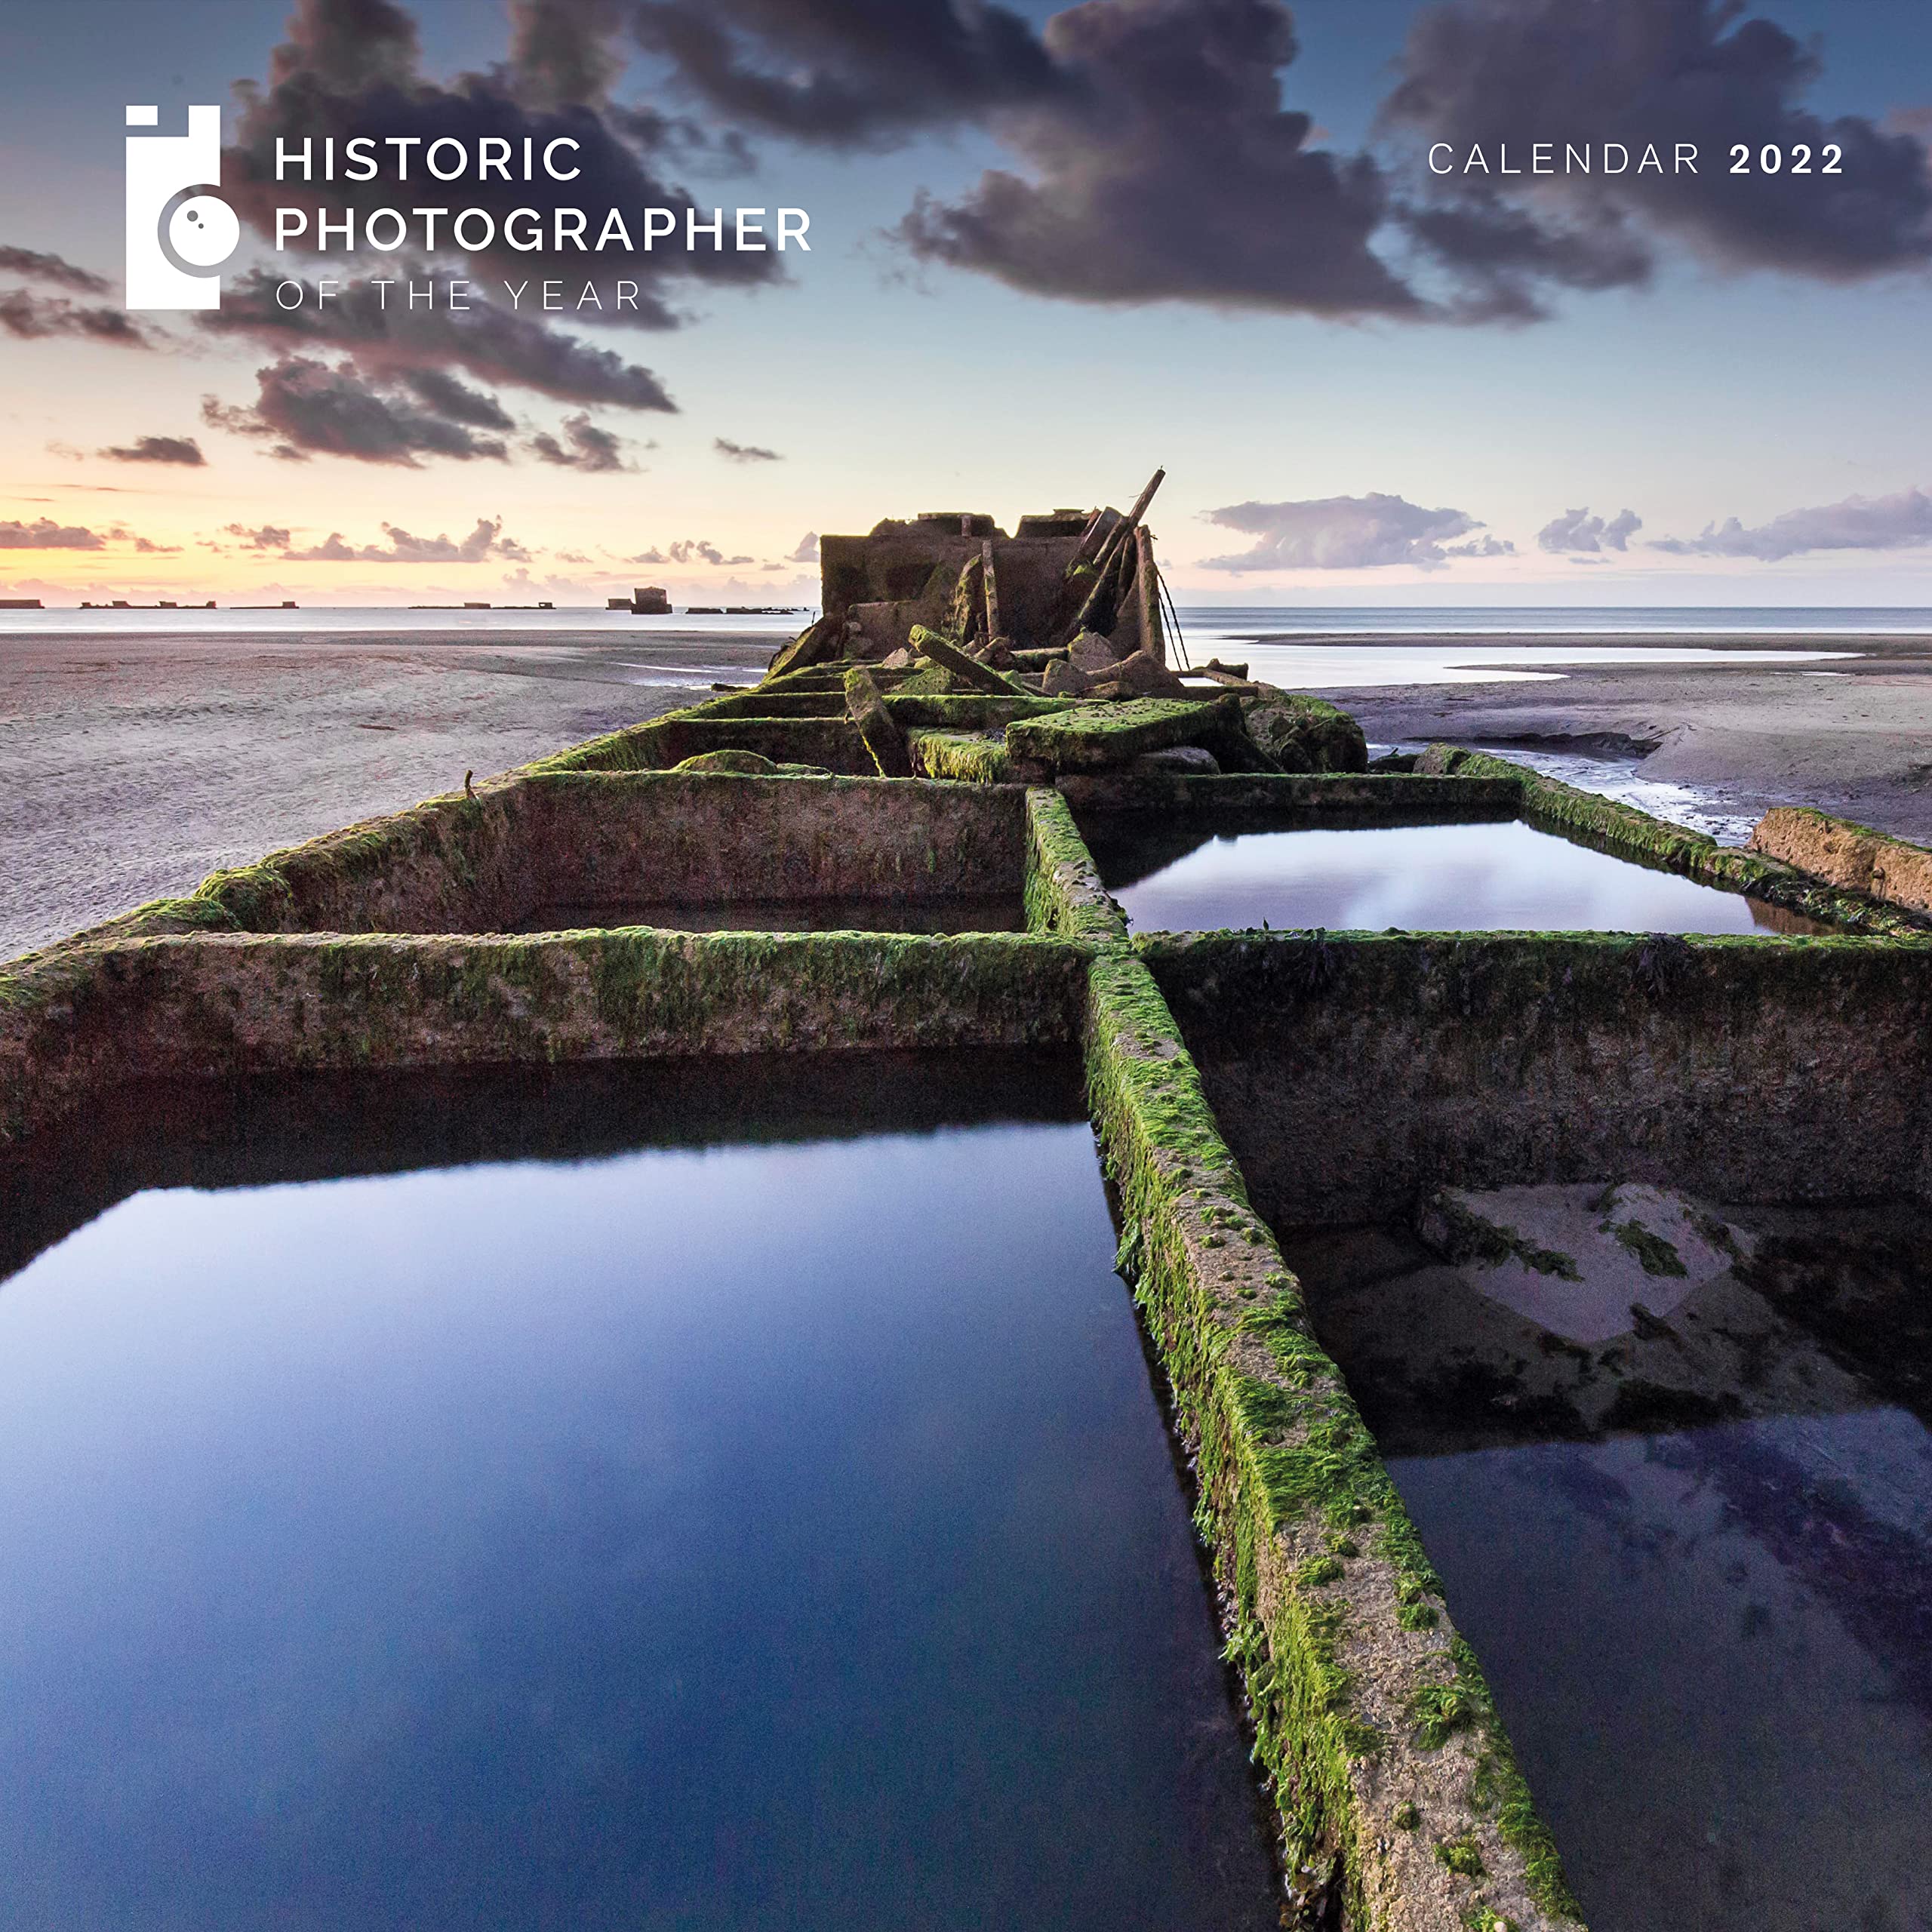 Calendar 2022 - Historic Photographer of the Year | Flame Tree Publishing